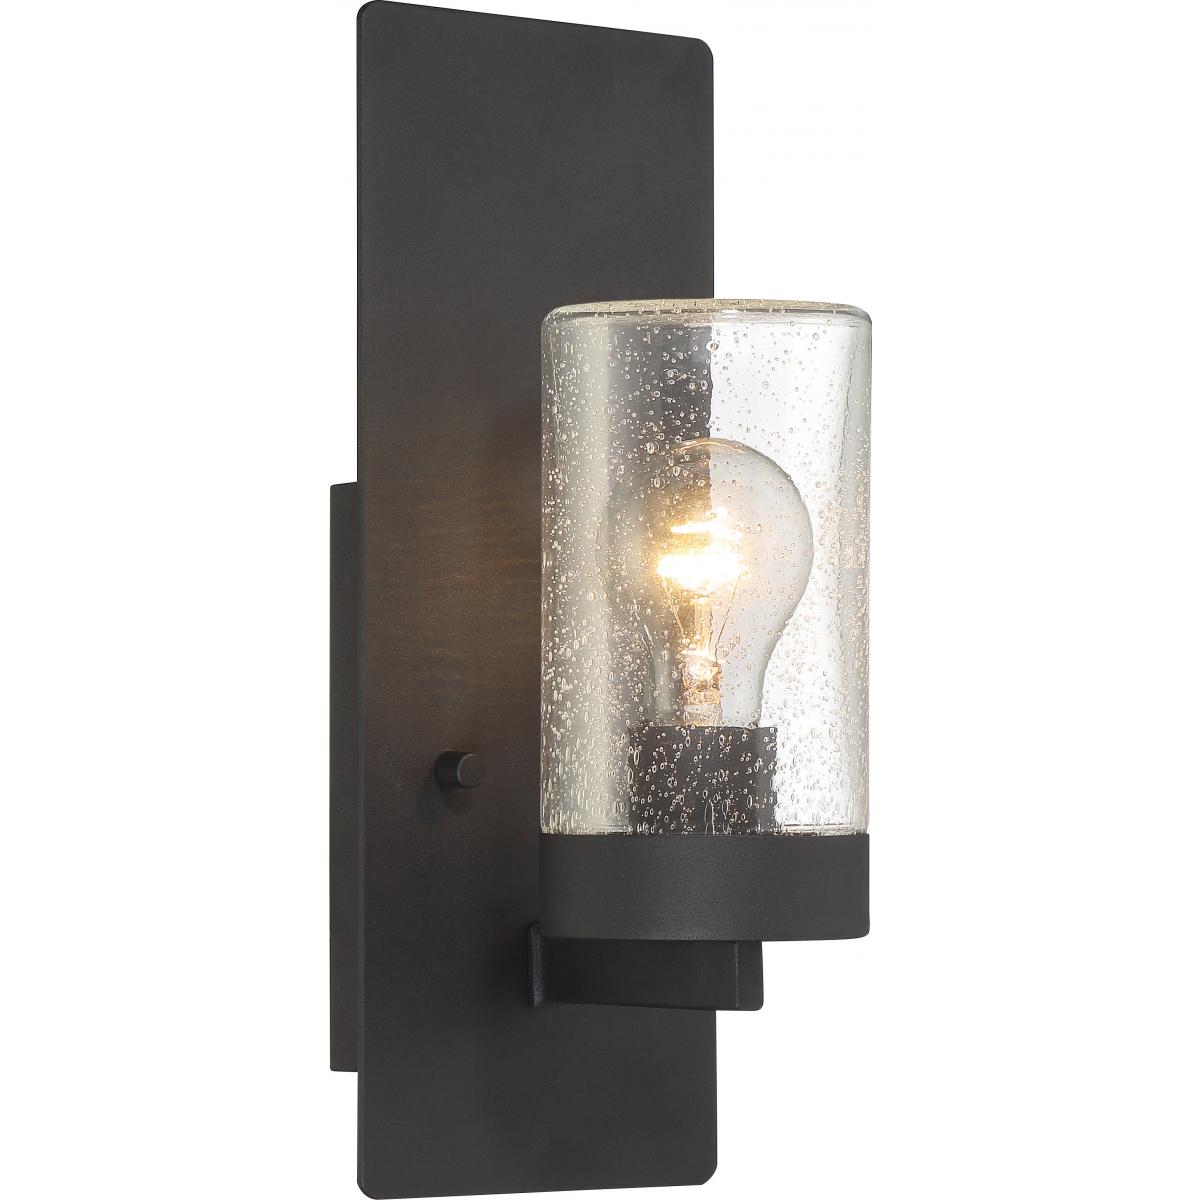 60-6579 INDIE 1 LT SMALL WALL SCONCE